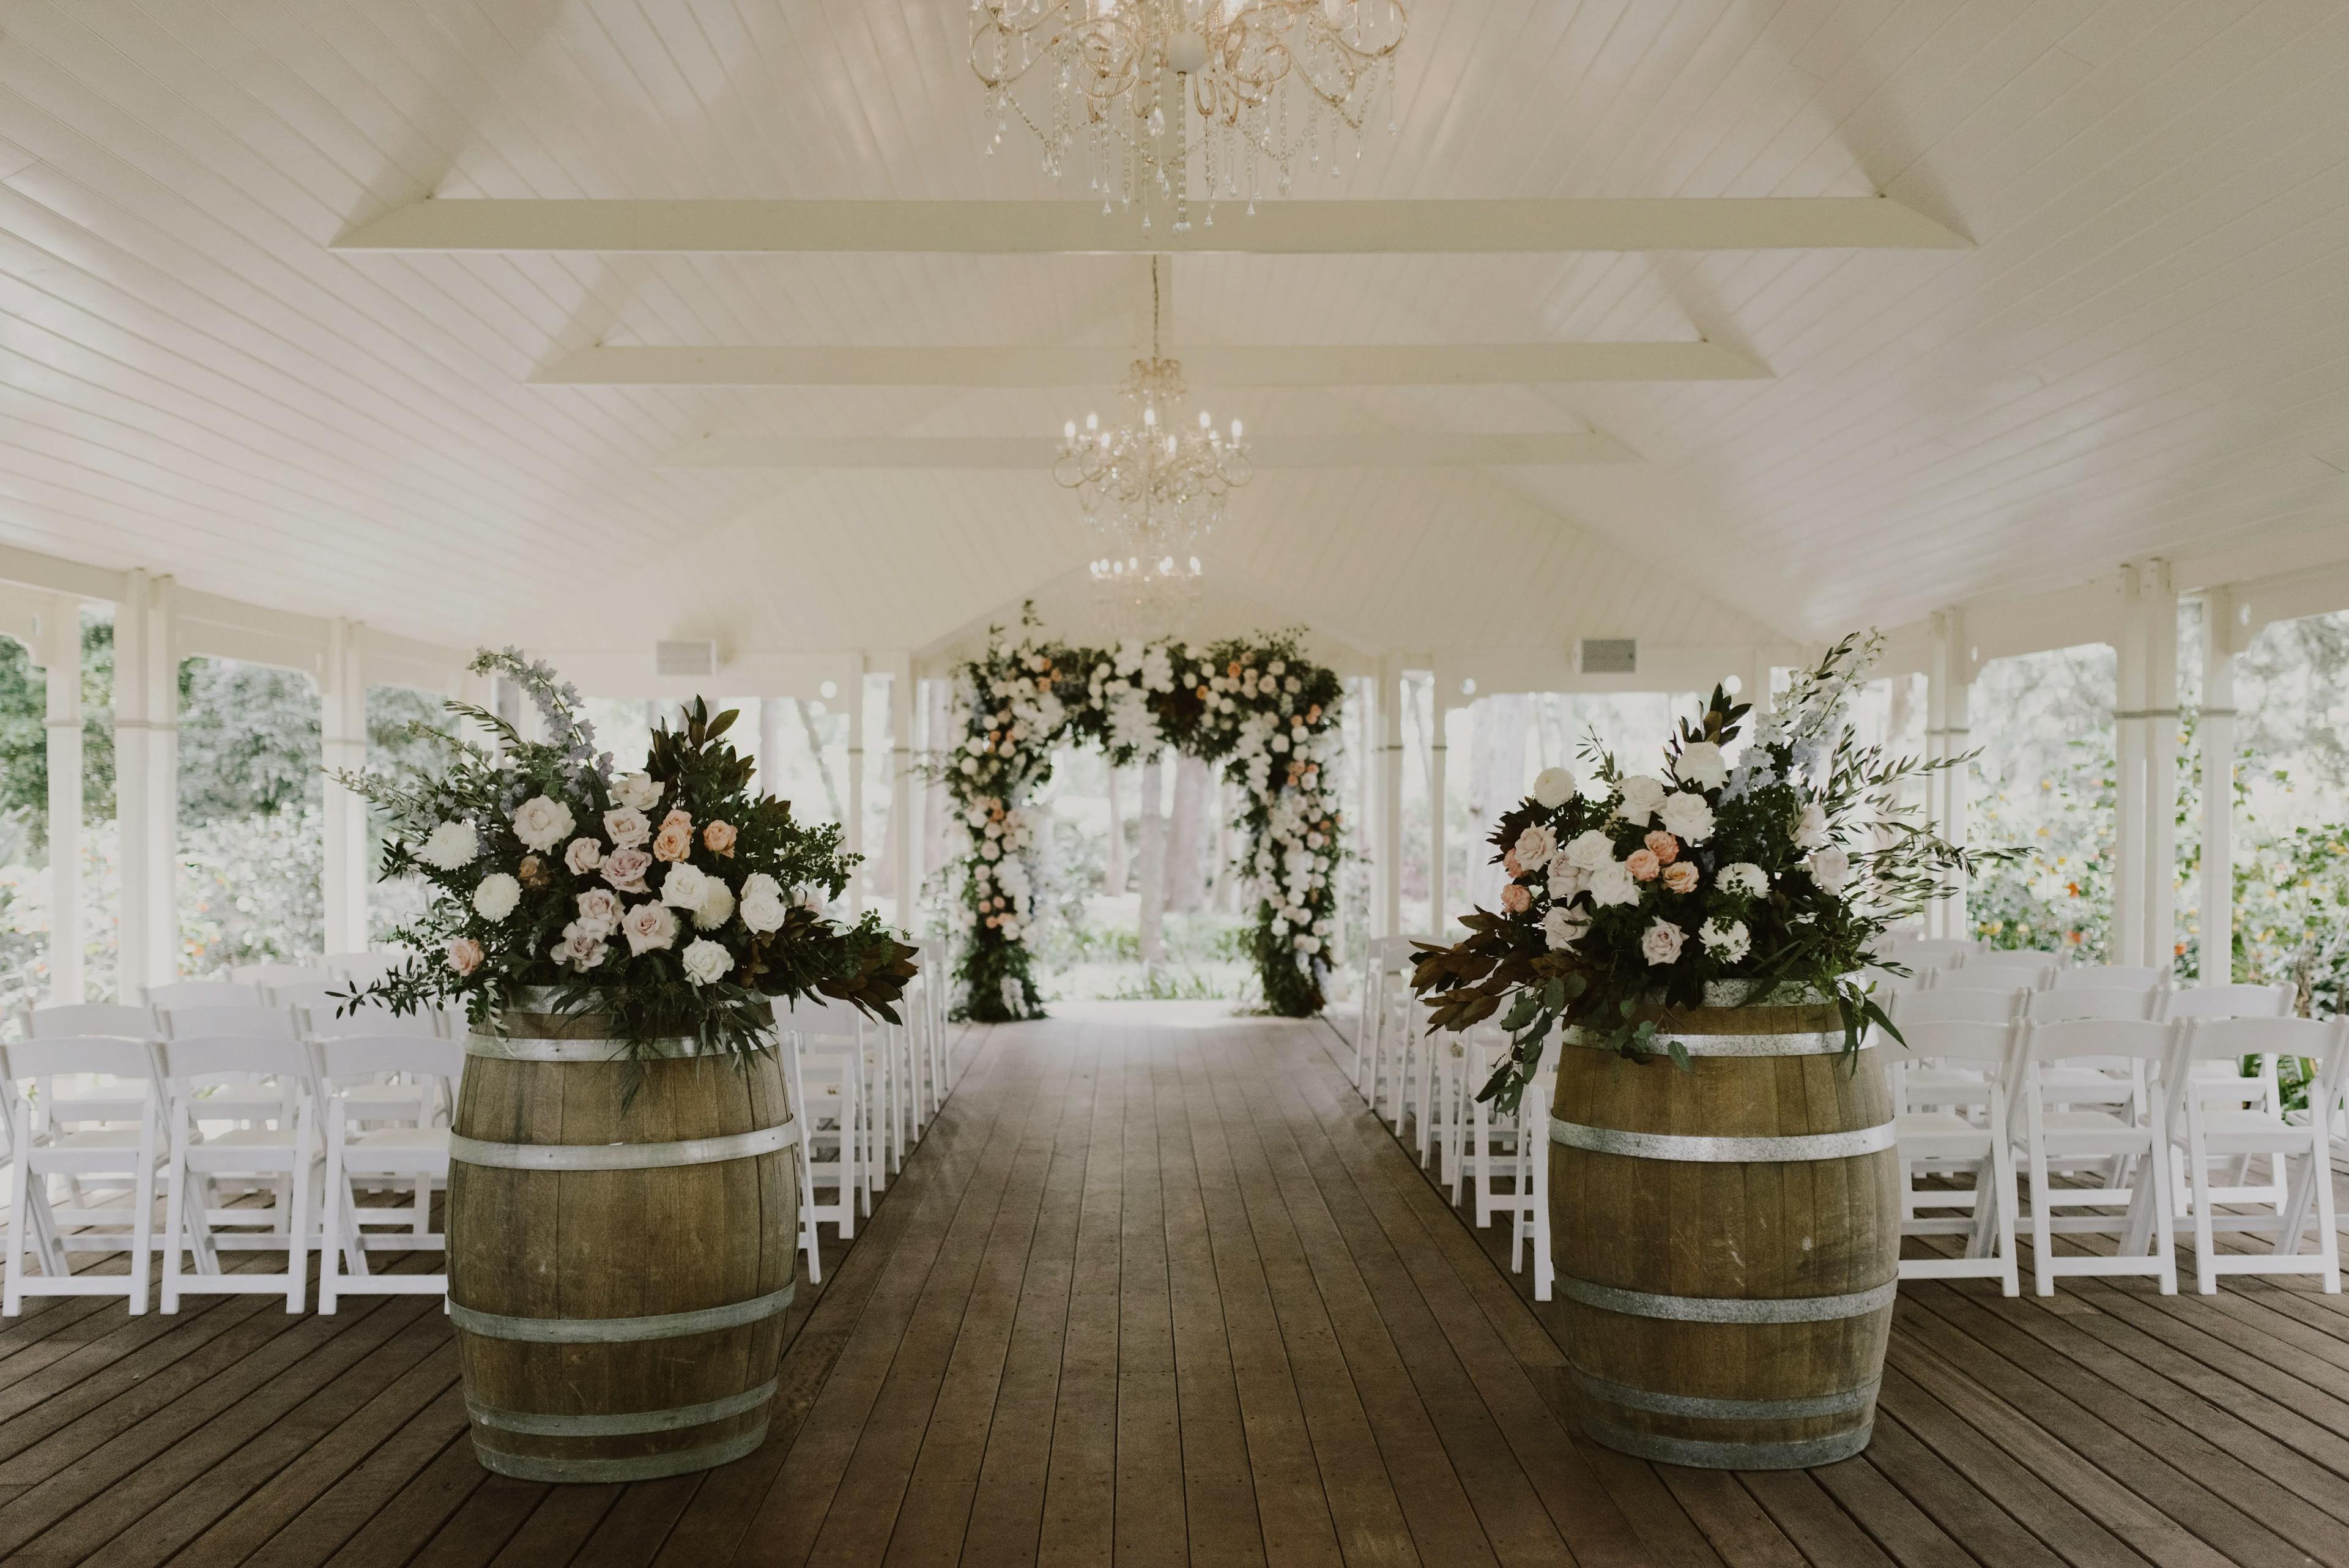 a view down the aisle in the ceremony space at gabbinbar, styled with beautiful flowers to compliment the white, elegant aesthetic of the barn